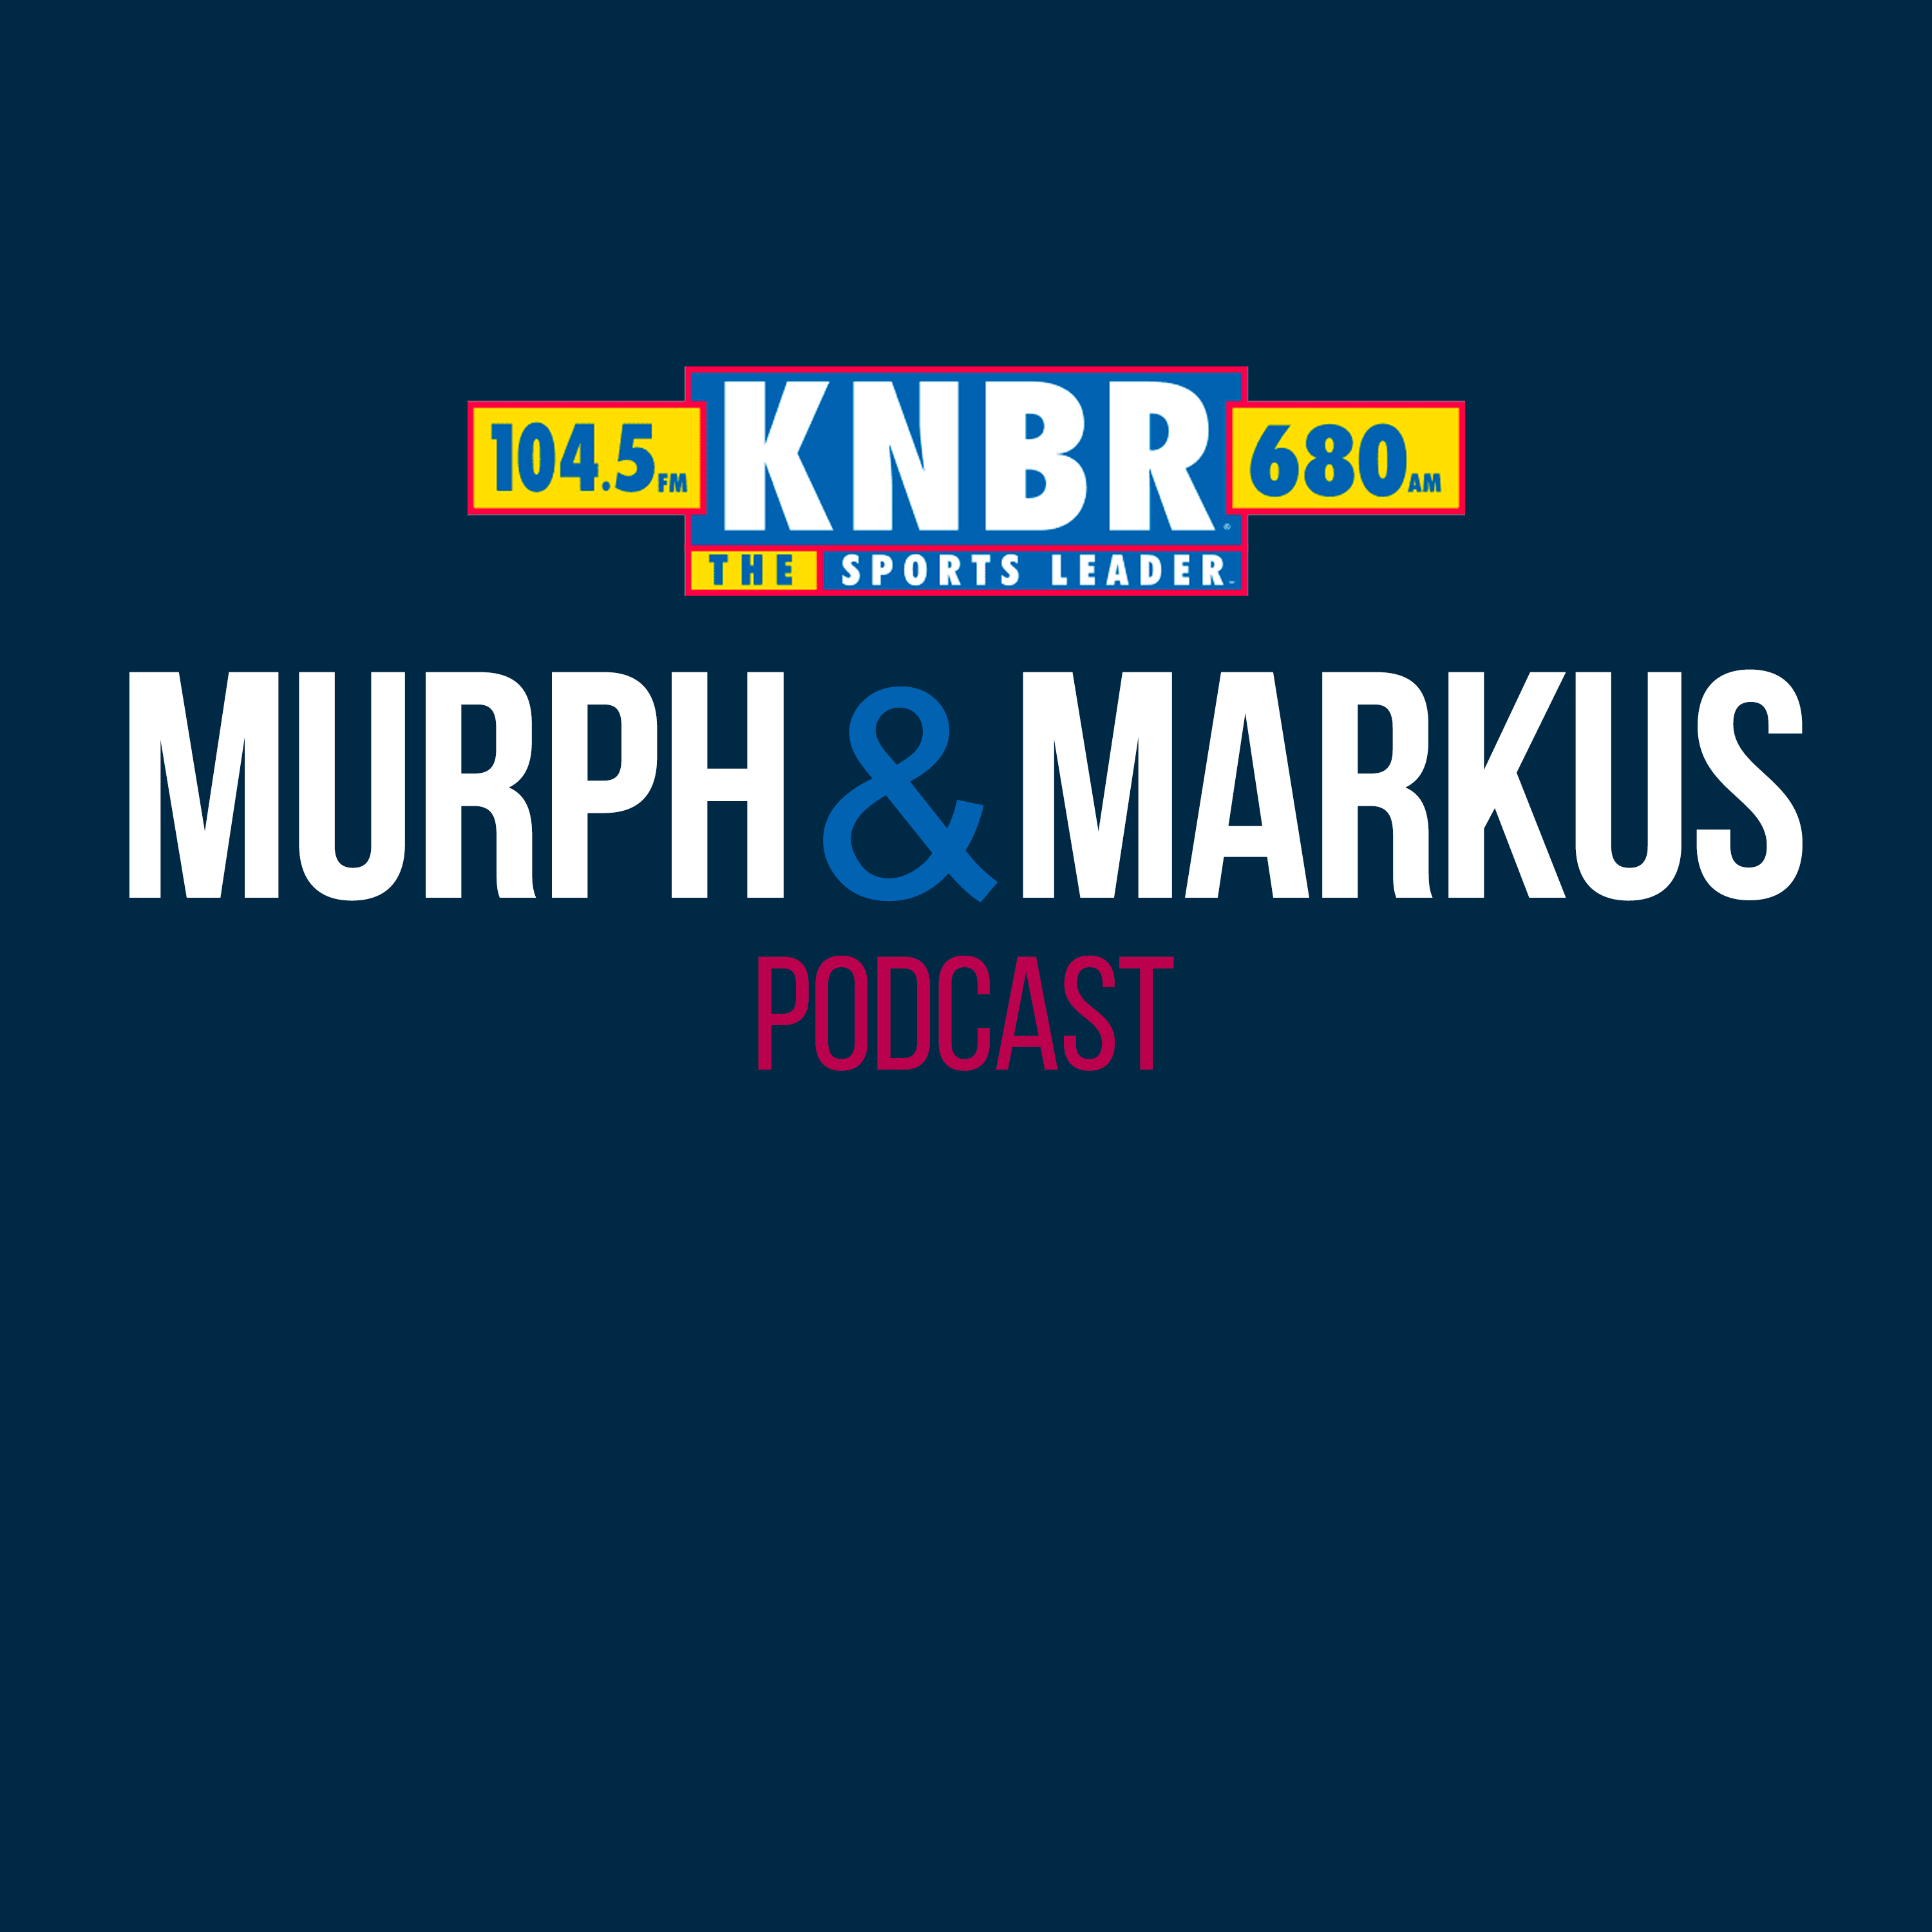 4-29 Hour 3: Murph & Markus dive into the Cooler of Content, discuss the strength of this Giants team: the pitching staff, and talk to Todd Husak